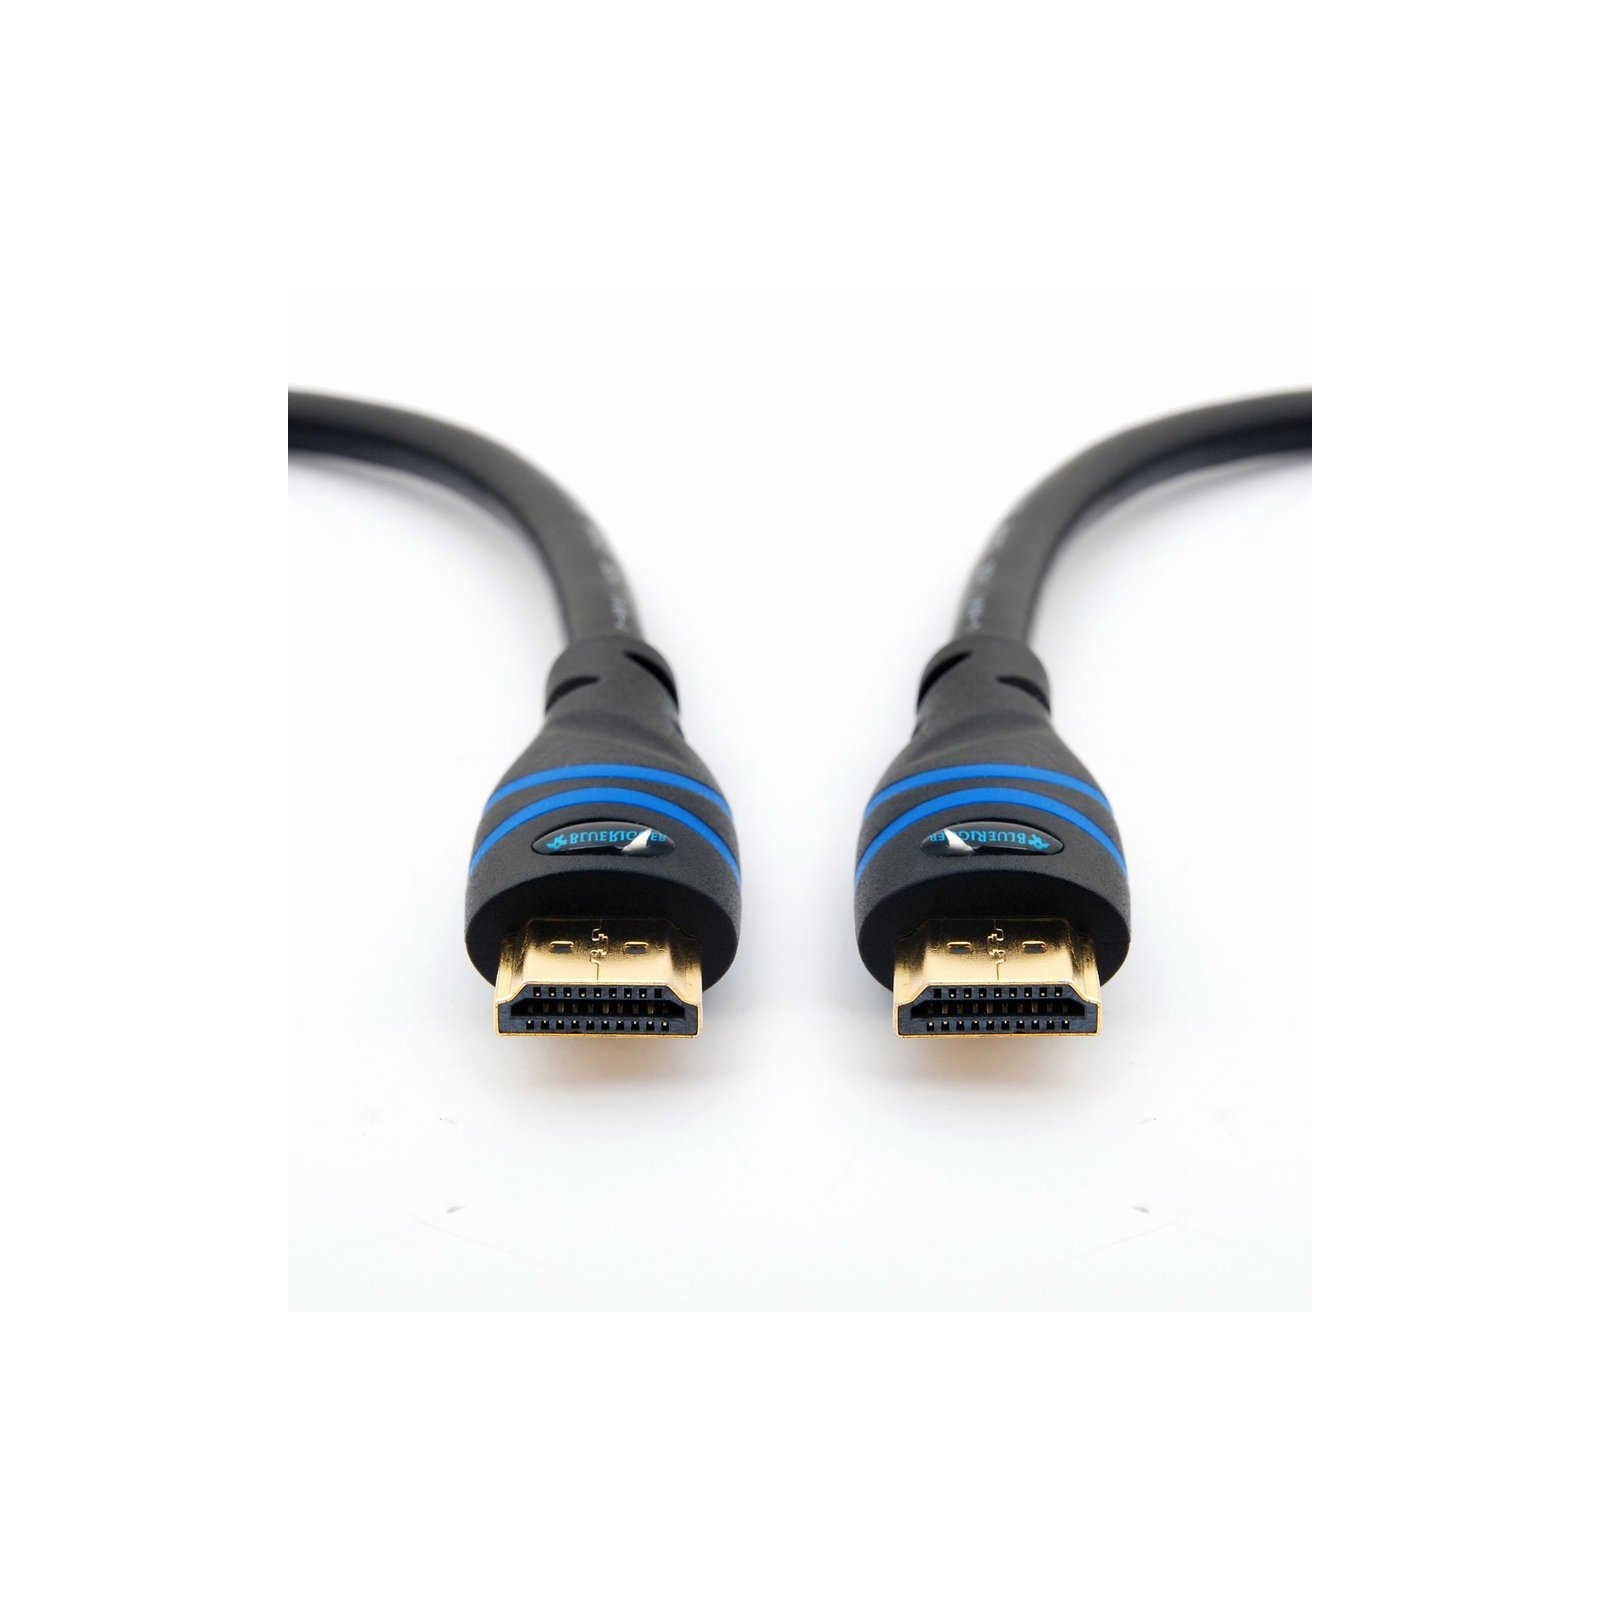 Ps4 Cables - Buy Ps4 Cables Online at Best Prices In India